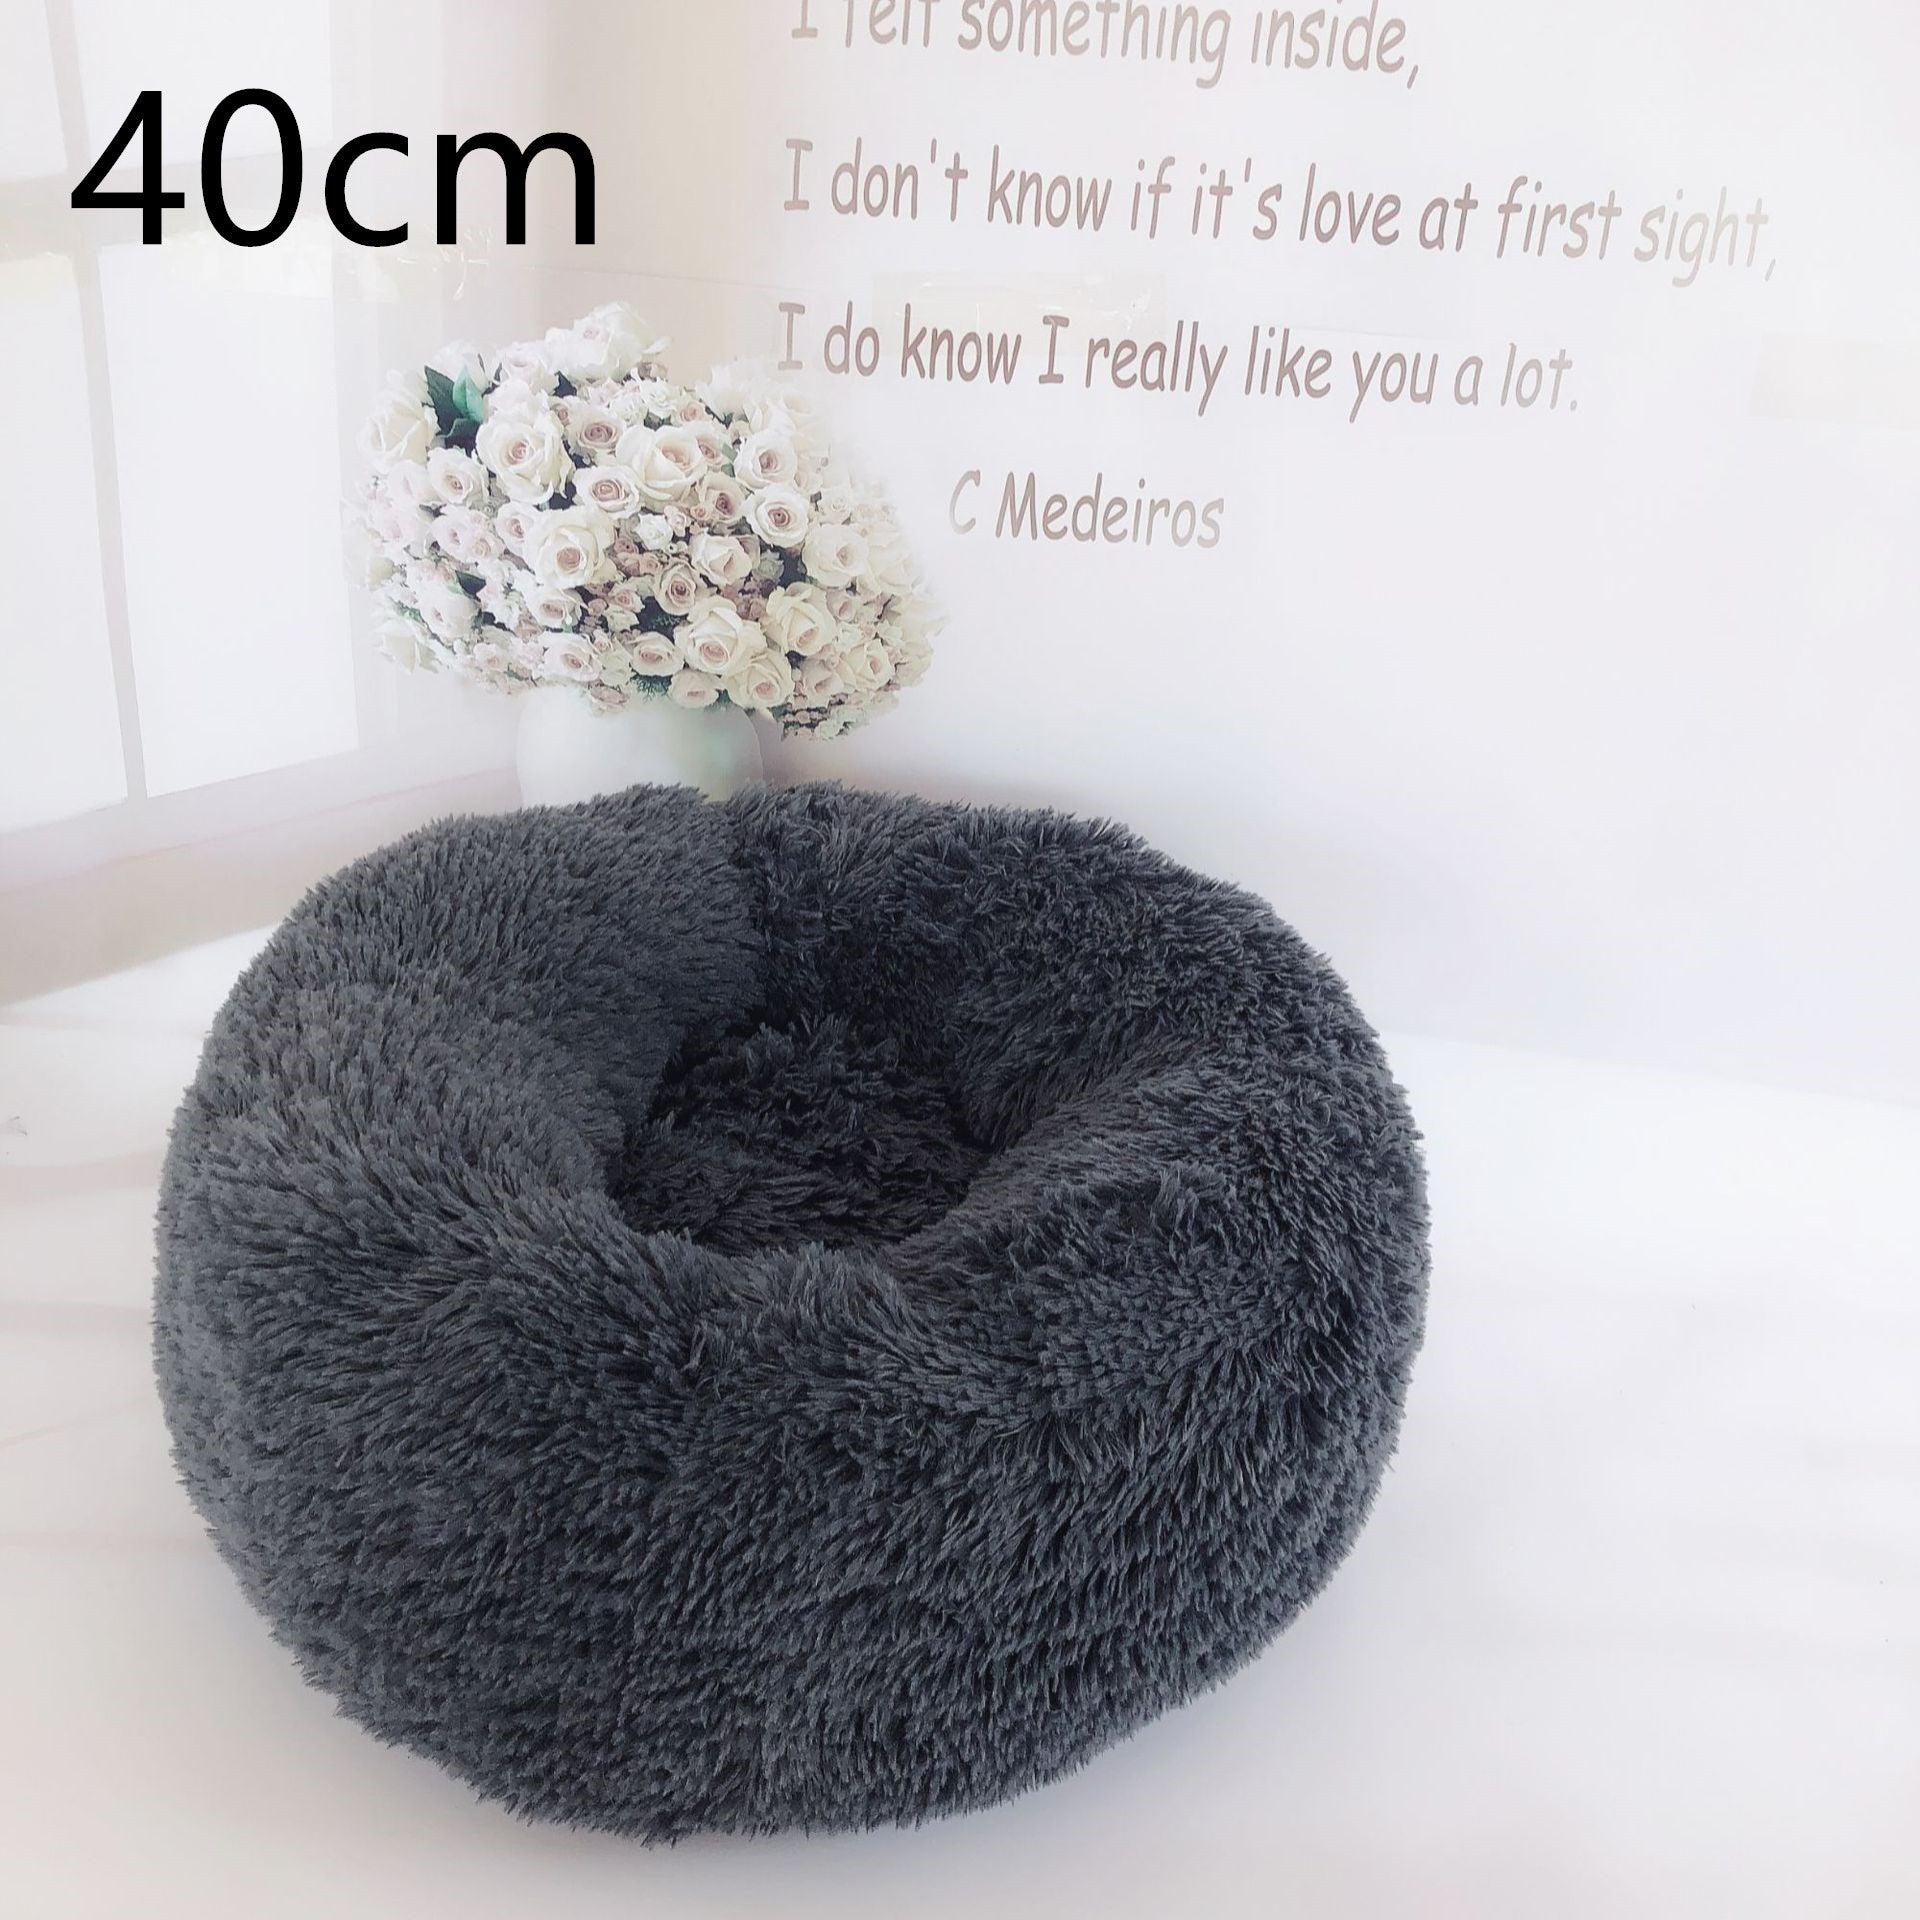 Cotton Pet Bed Winter Warm Sleeping Bed For Dogs Kennel Dog Round Cat Long Plush Puppy Cushion Mat Portable Cat Supplies - Dog Hugs Cat